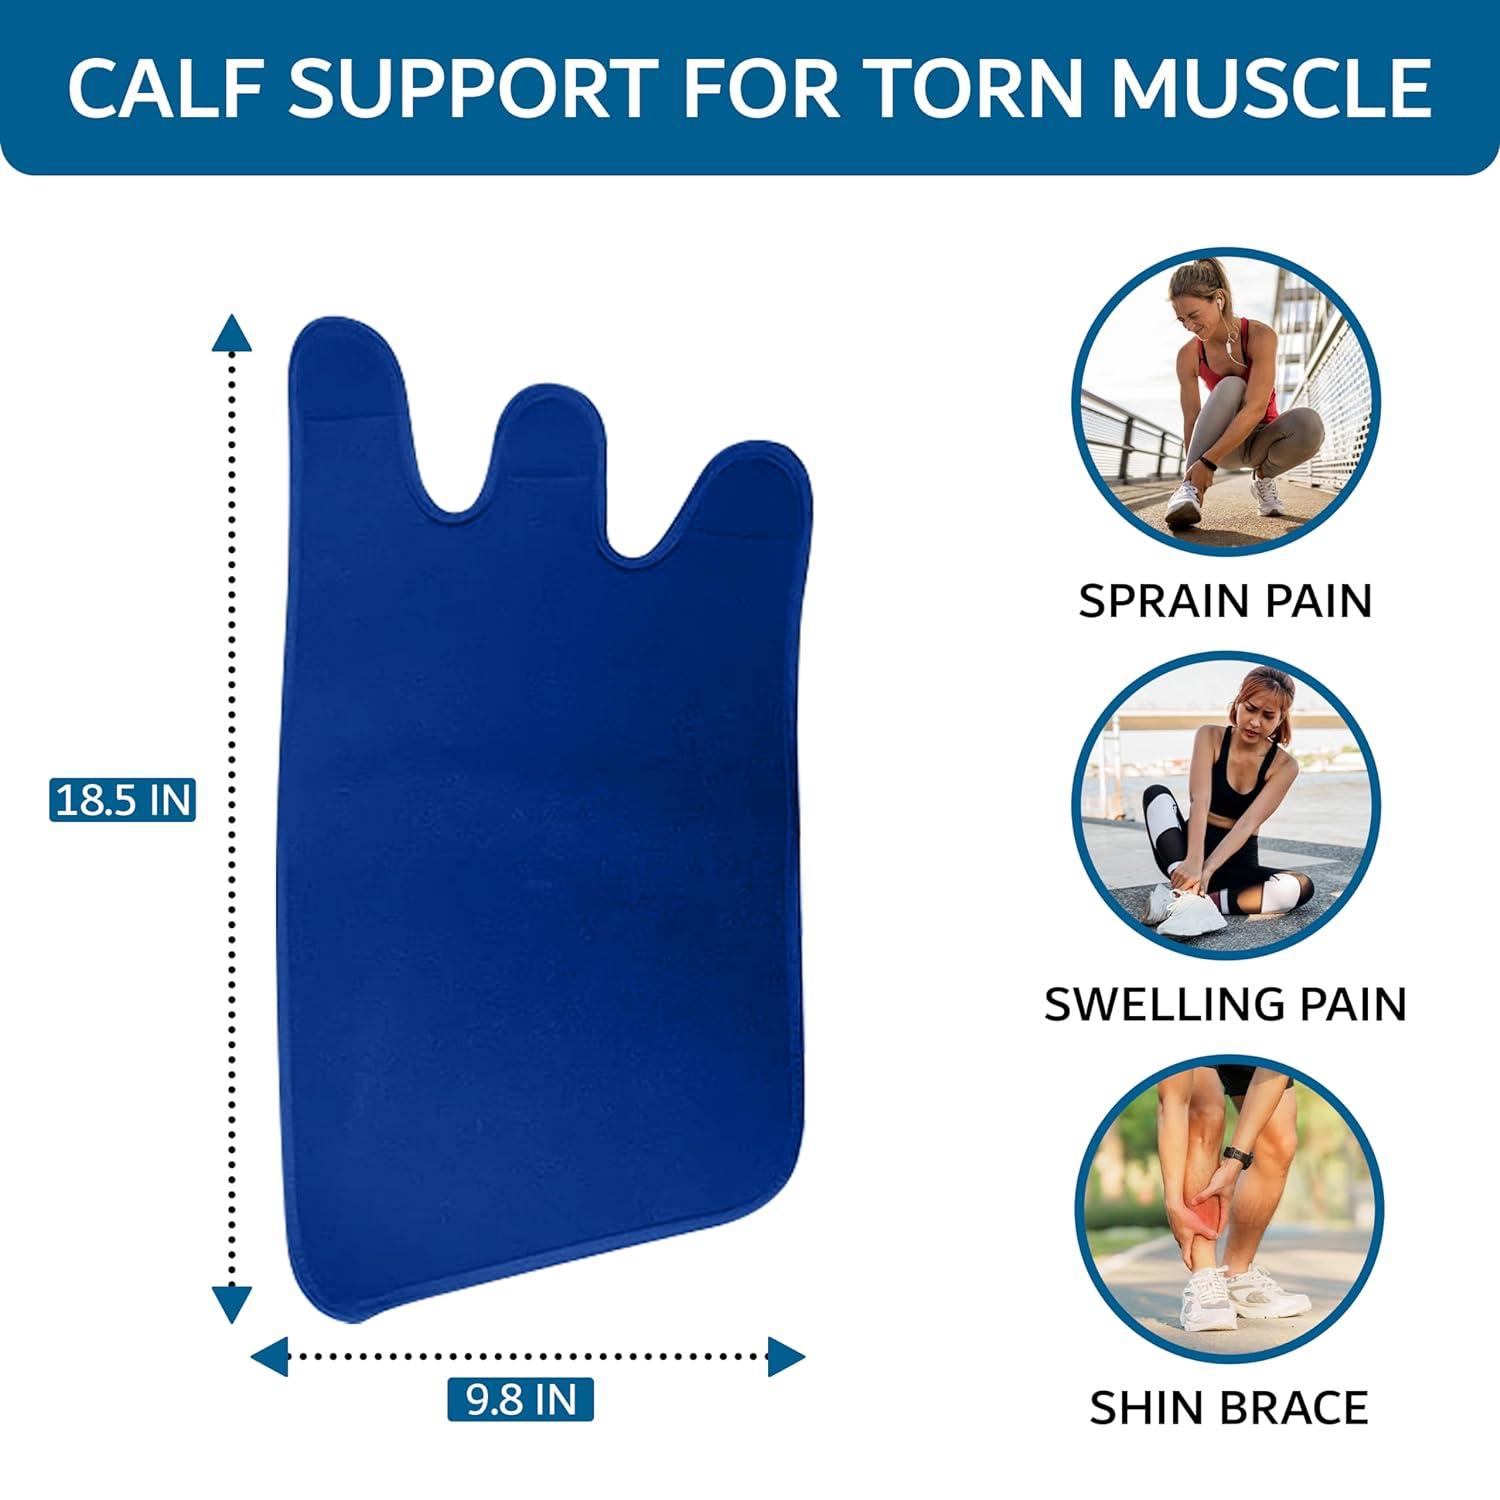 LCK UK Calf Support for Torn Muscle Adjustable Compression Sleeve